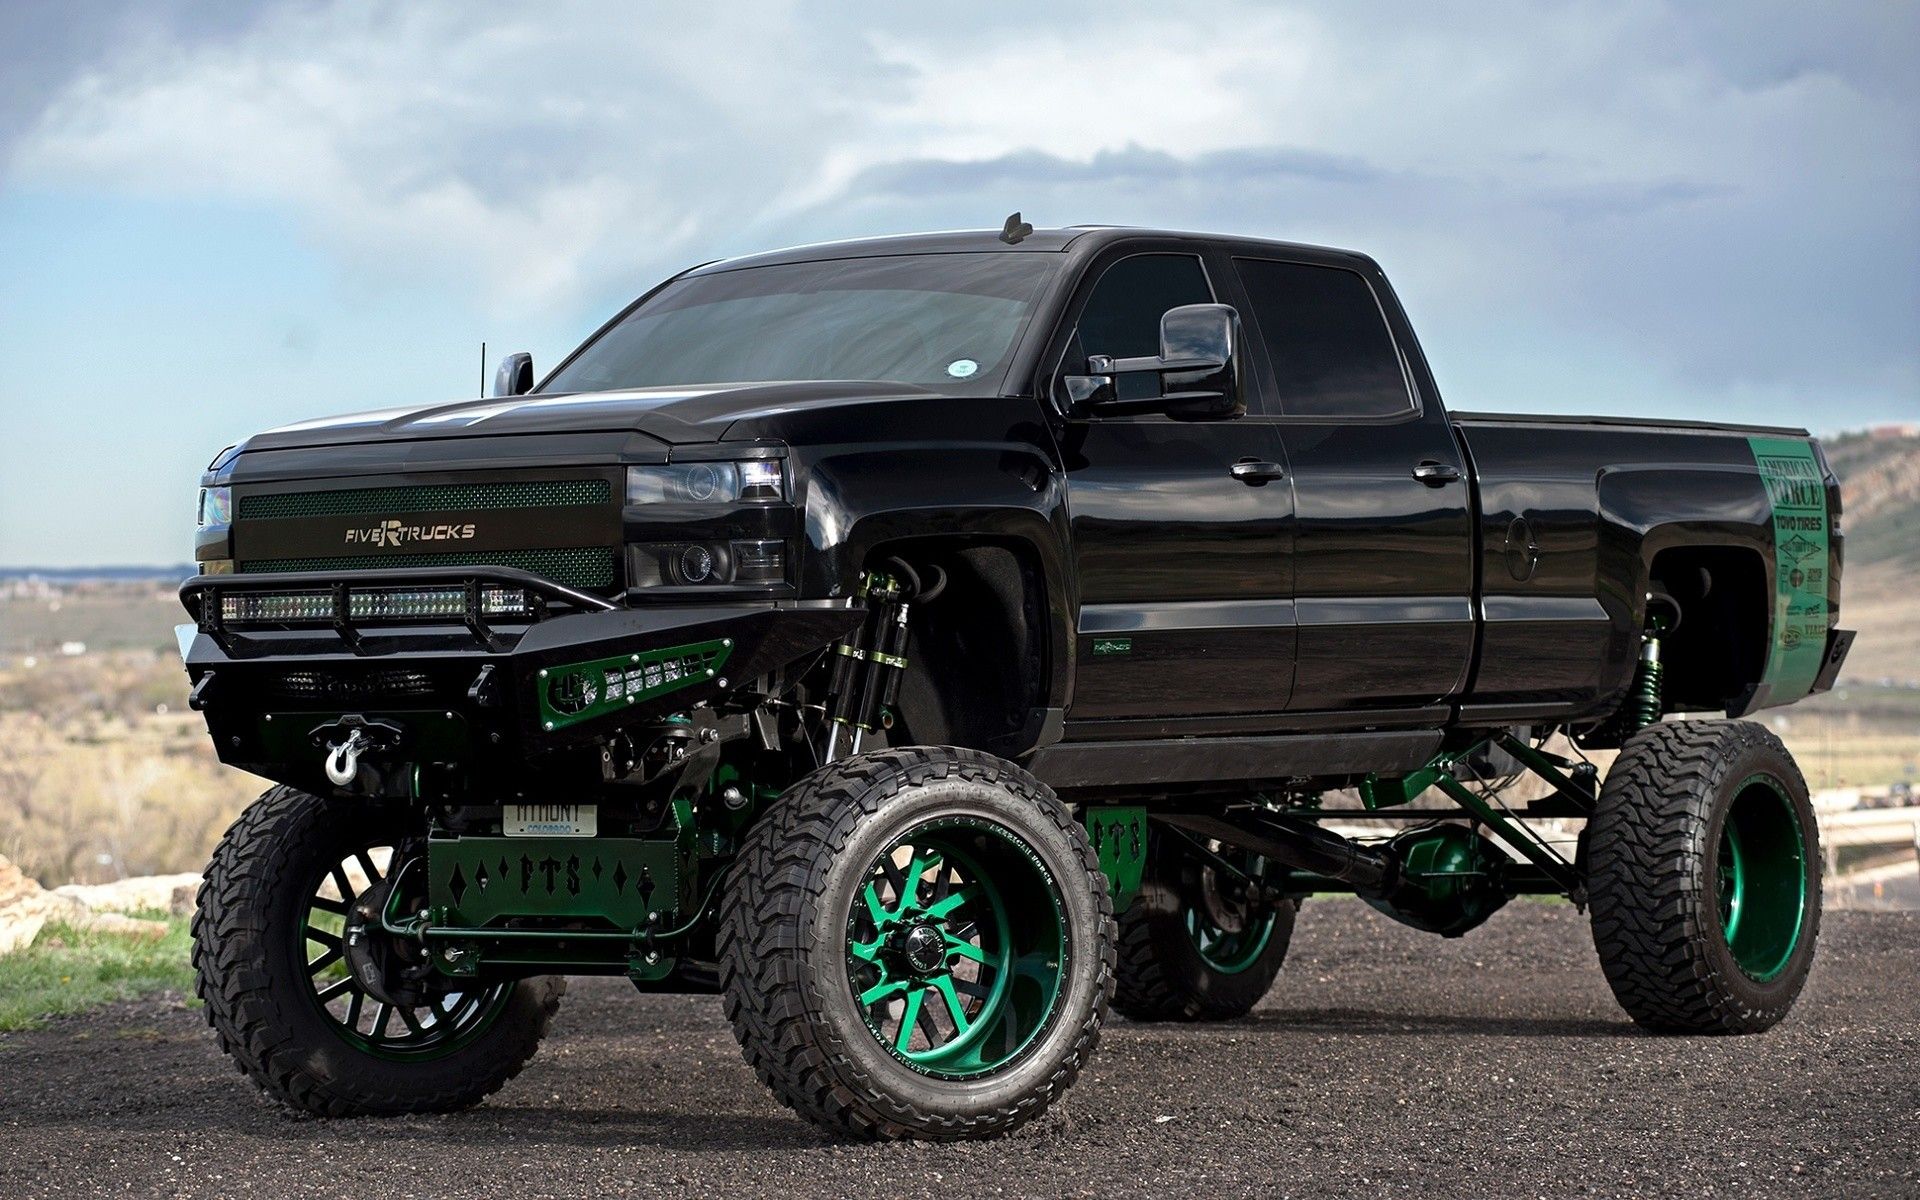 46+ Lifted Truck Wallpapers HD.